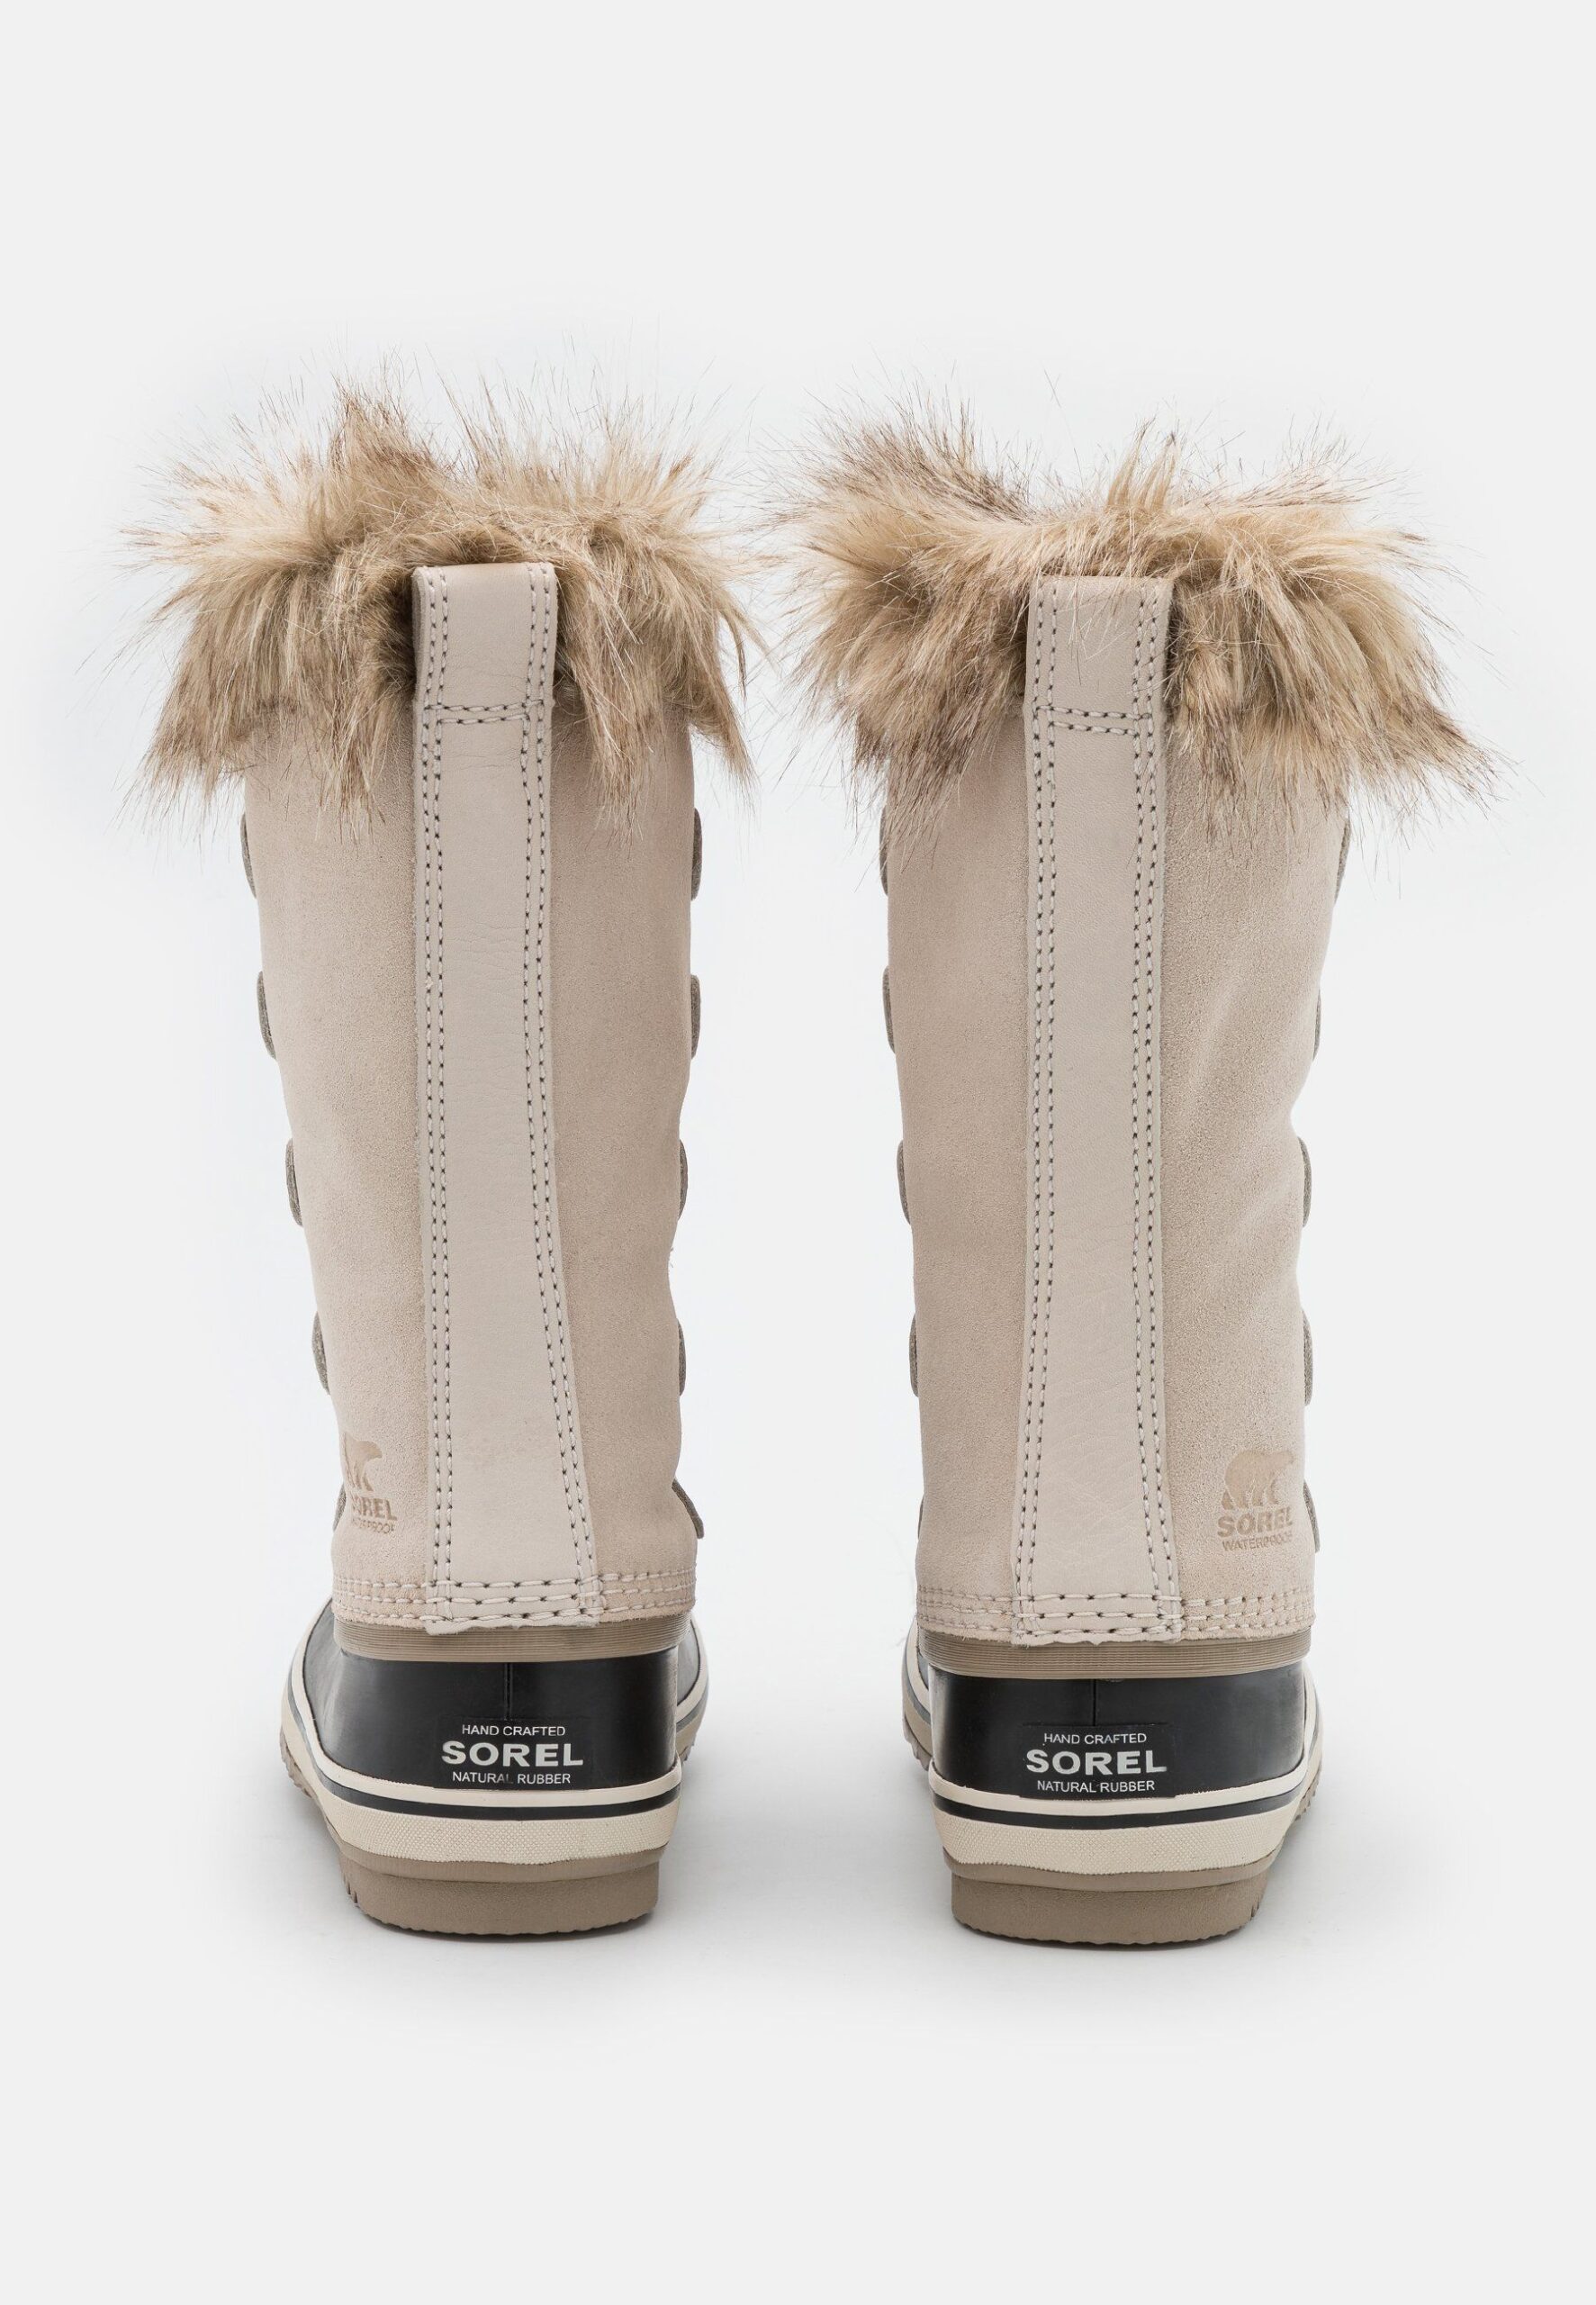 Finding best sale for Sorel Joan of
Arctic boots